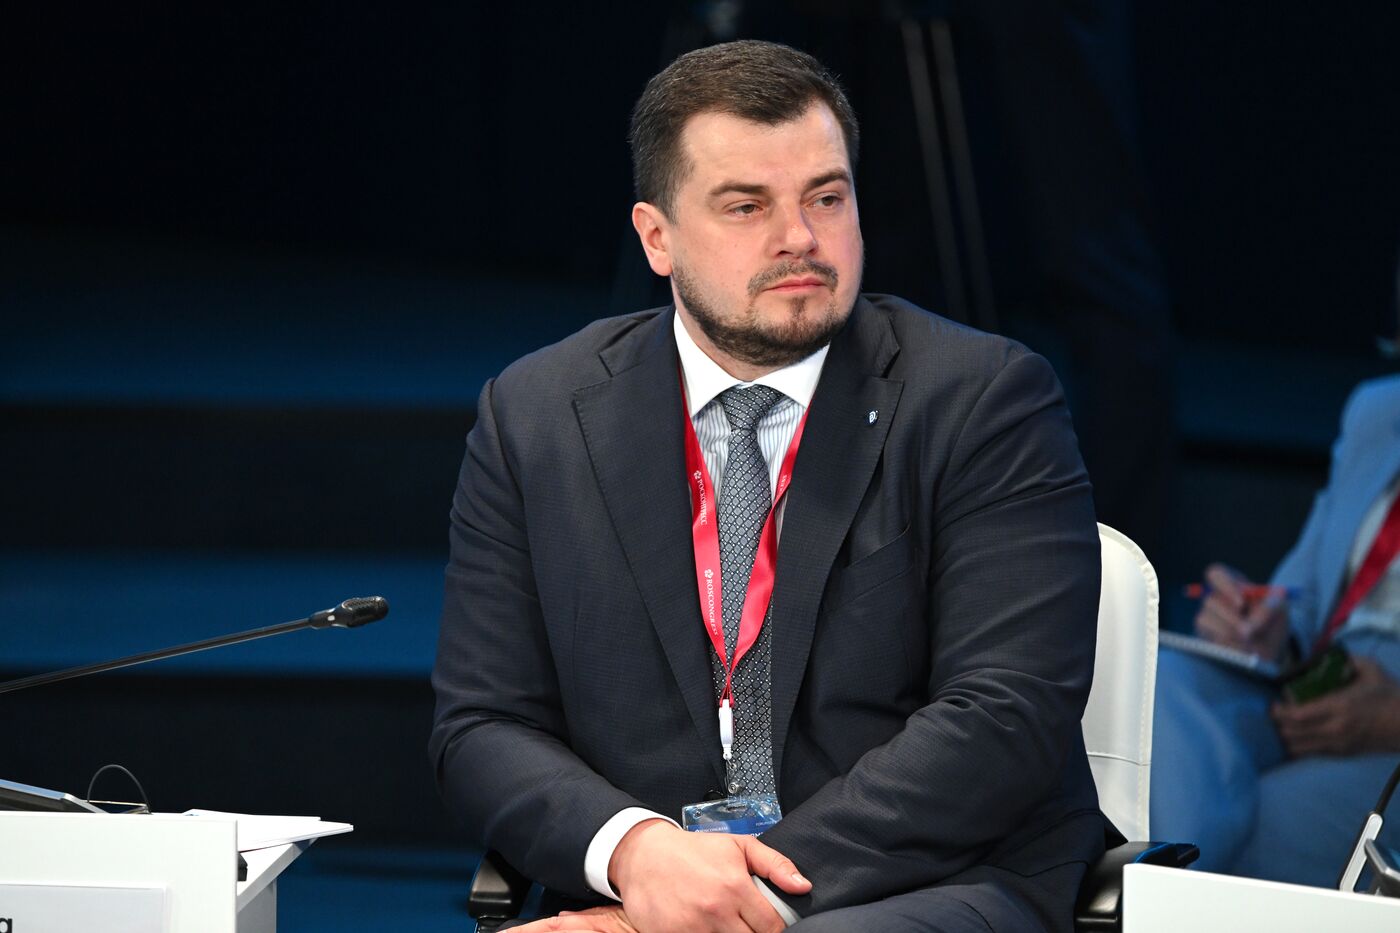 SPIEF-2023. An Effective Strategy in Drug Provision